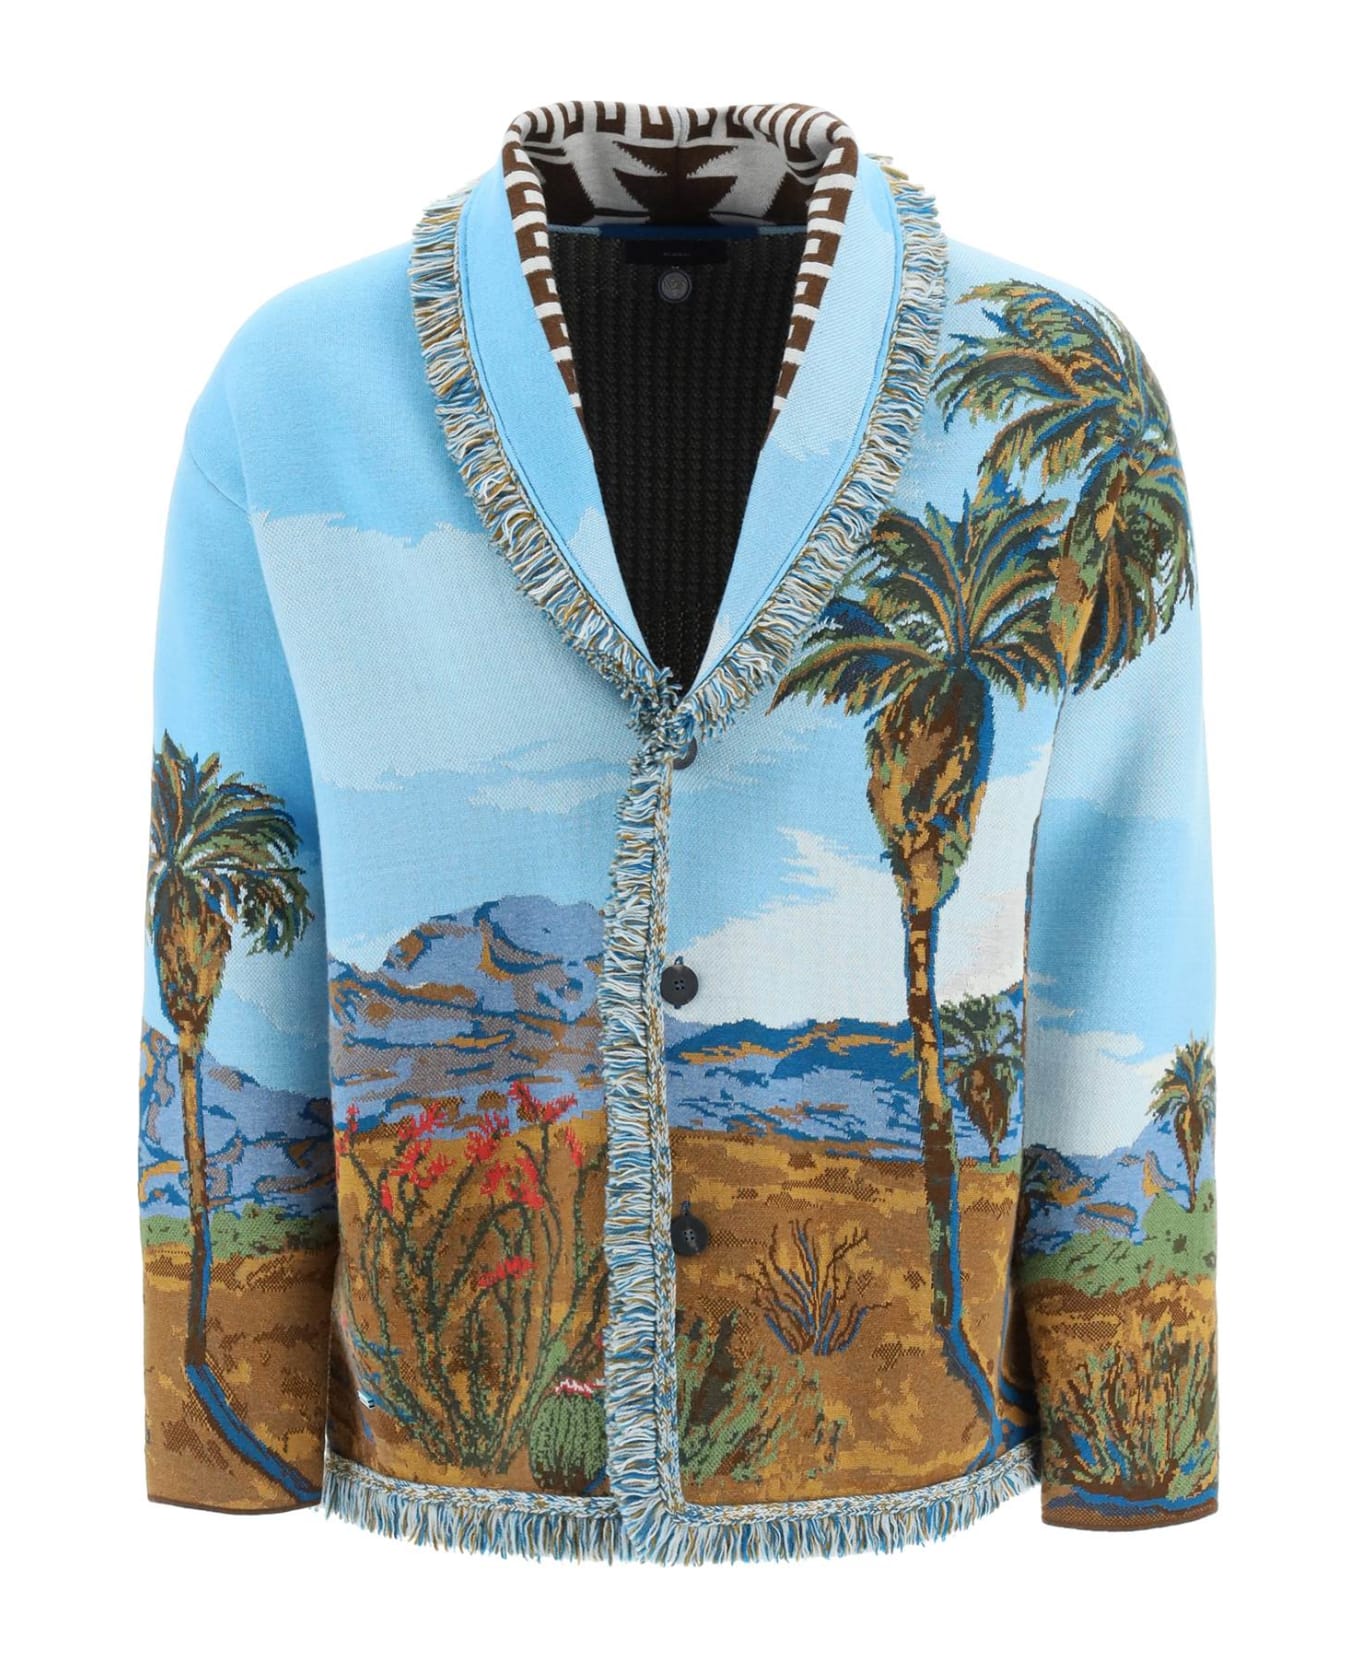 Alanui Embroidered Land Of Dreams Cardigan - Multicolor ニットウェア